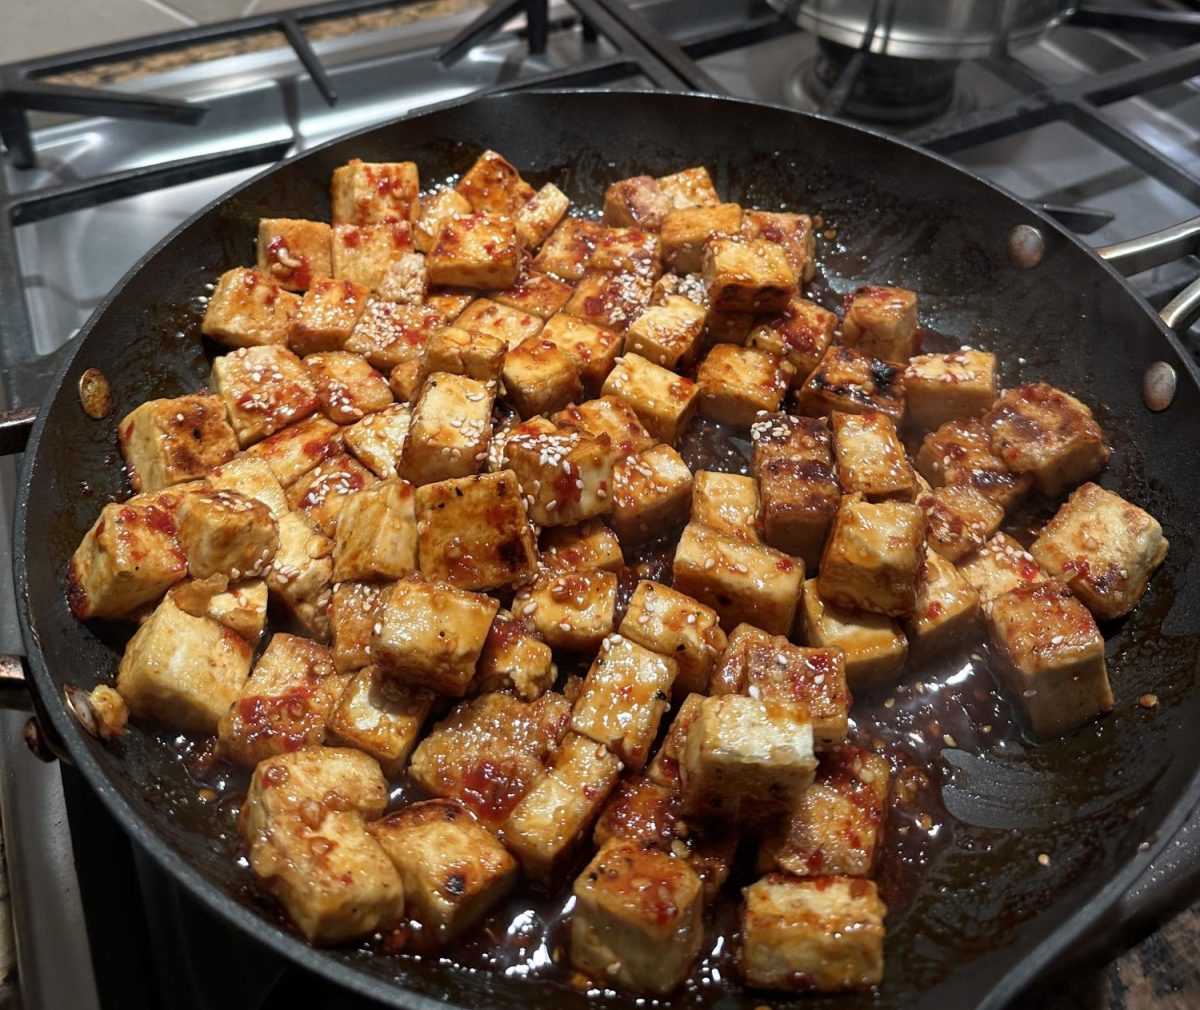 After stirring the sauce into the tofu, the bland taste is completely gone.